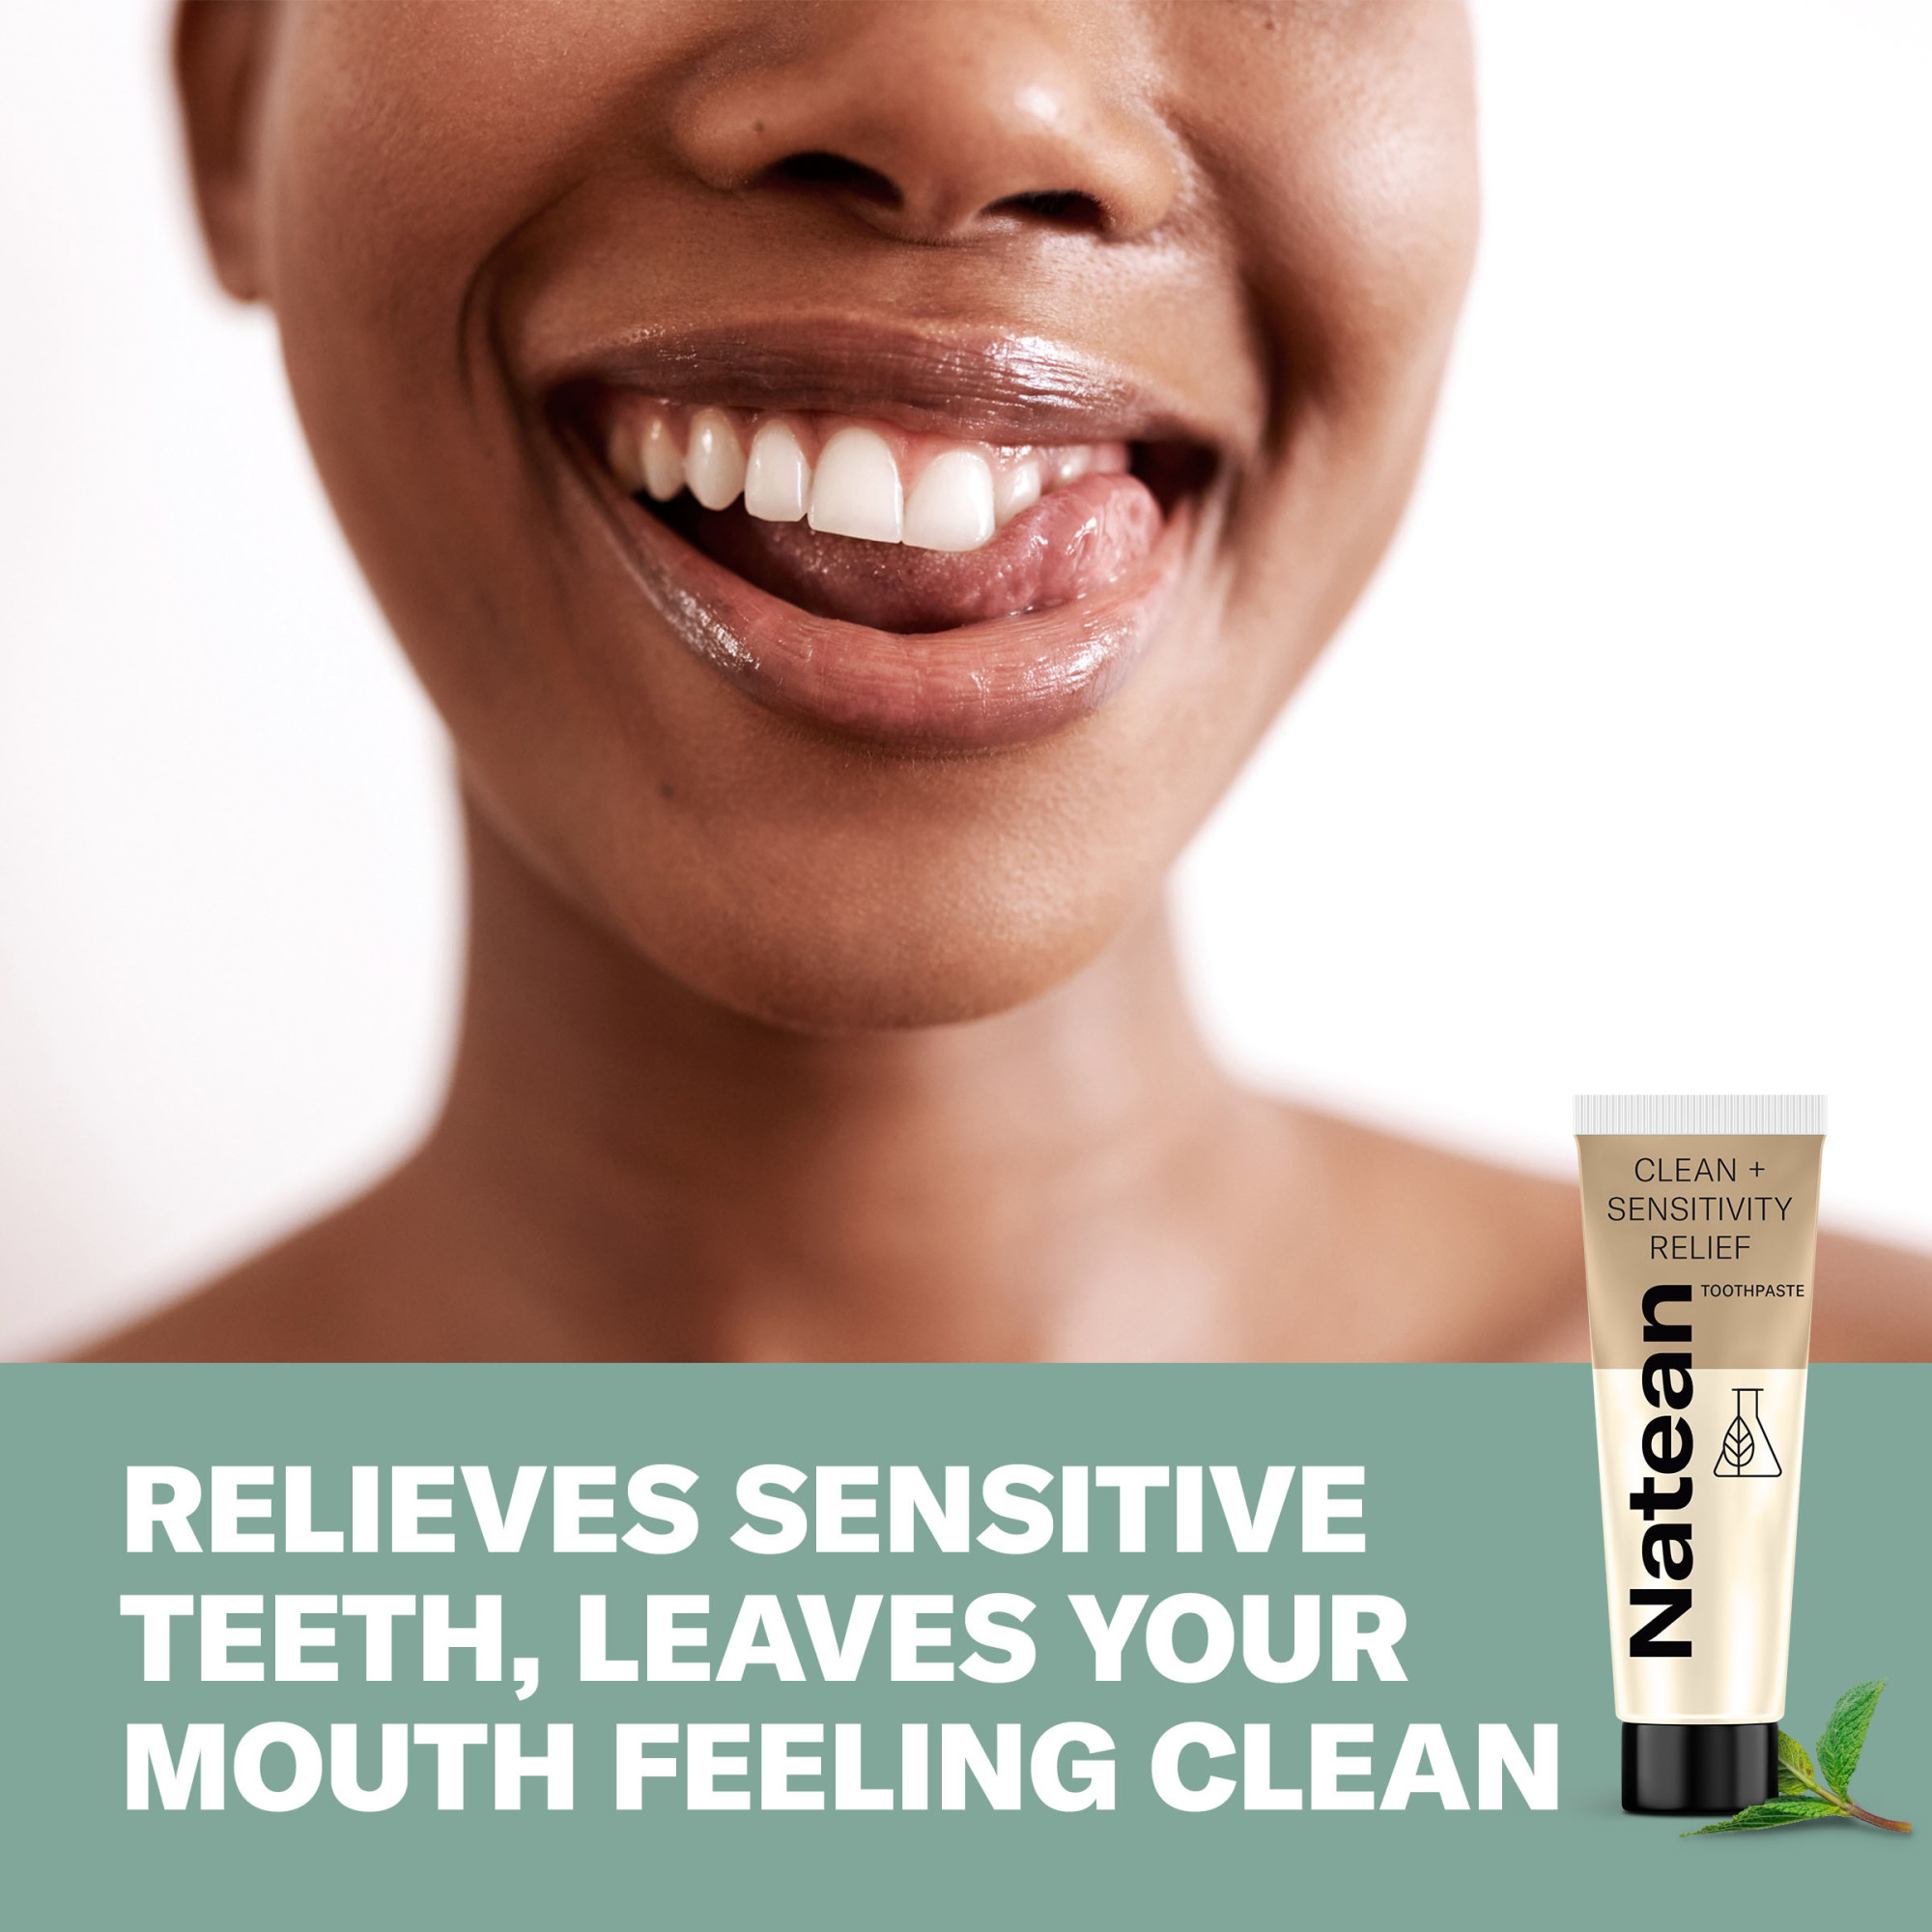 Natean Clean + Sensitivity Relief Toothpaste for Sensitive Teeth and Cavity Prevention, Soothing Mint - 4.7 Oz Tube - image 3 of 8